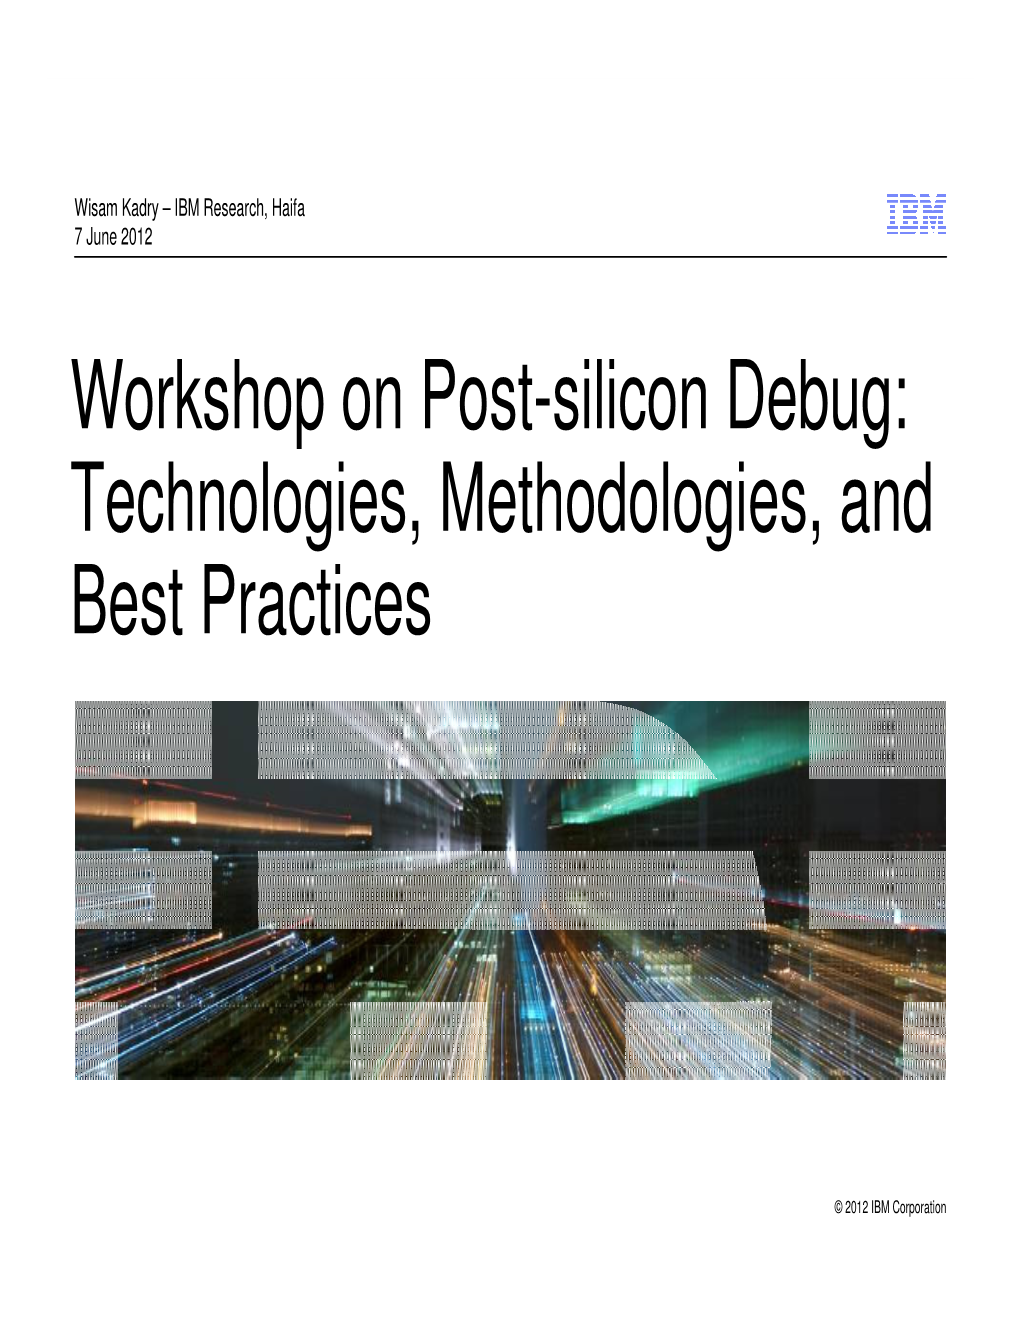 Workshop on Post-Silicon Debug: Technologies, Methodologies, and Best Practices